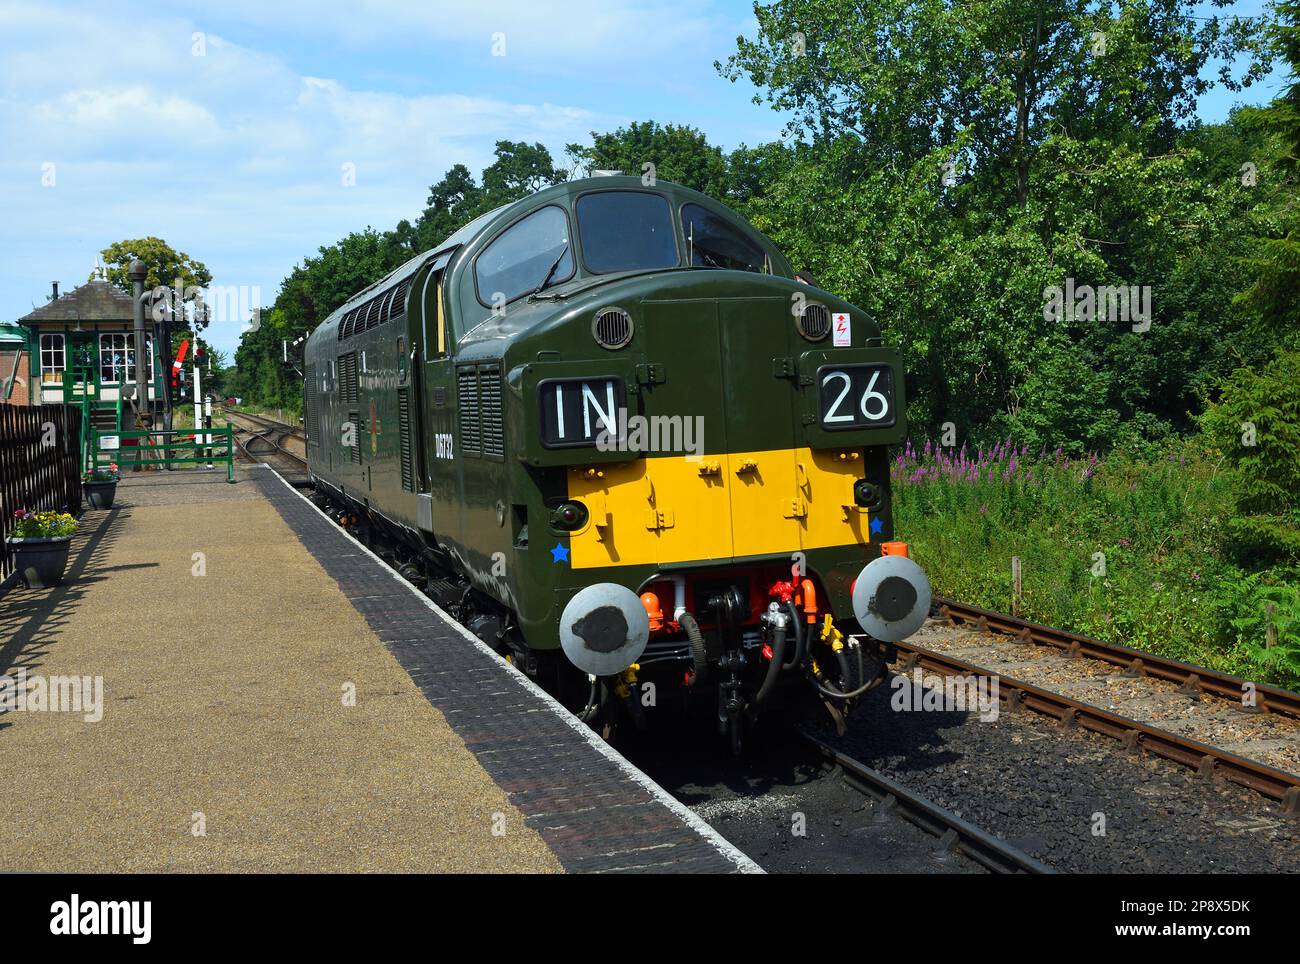 HOLT, NORFOLK, ENGLAND - JULY 14, 2022: Vintage BR Class 37 English Electric Type 3 diesel engine at holt station. Stock Photo